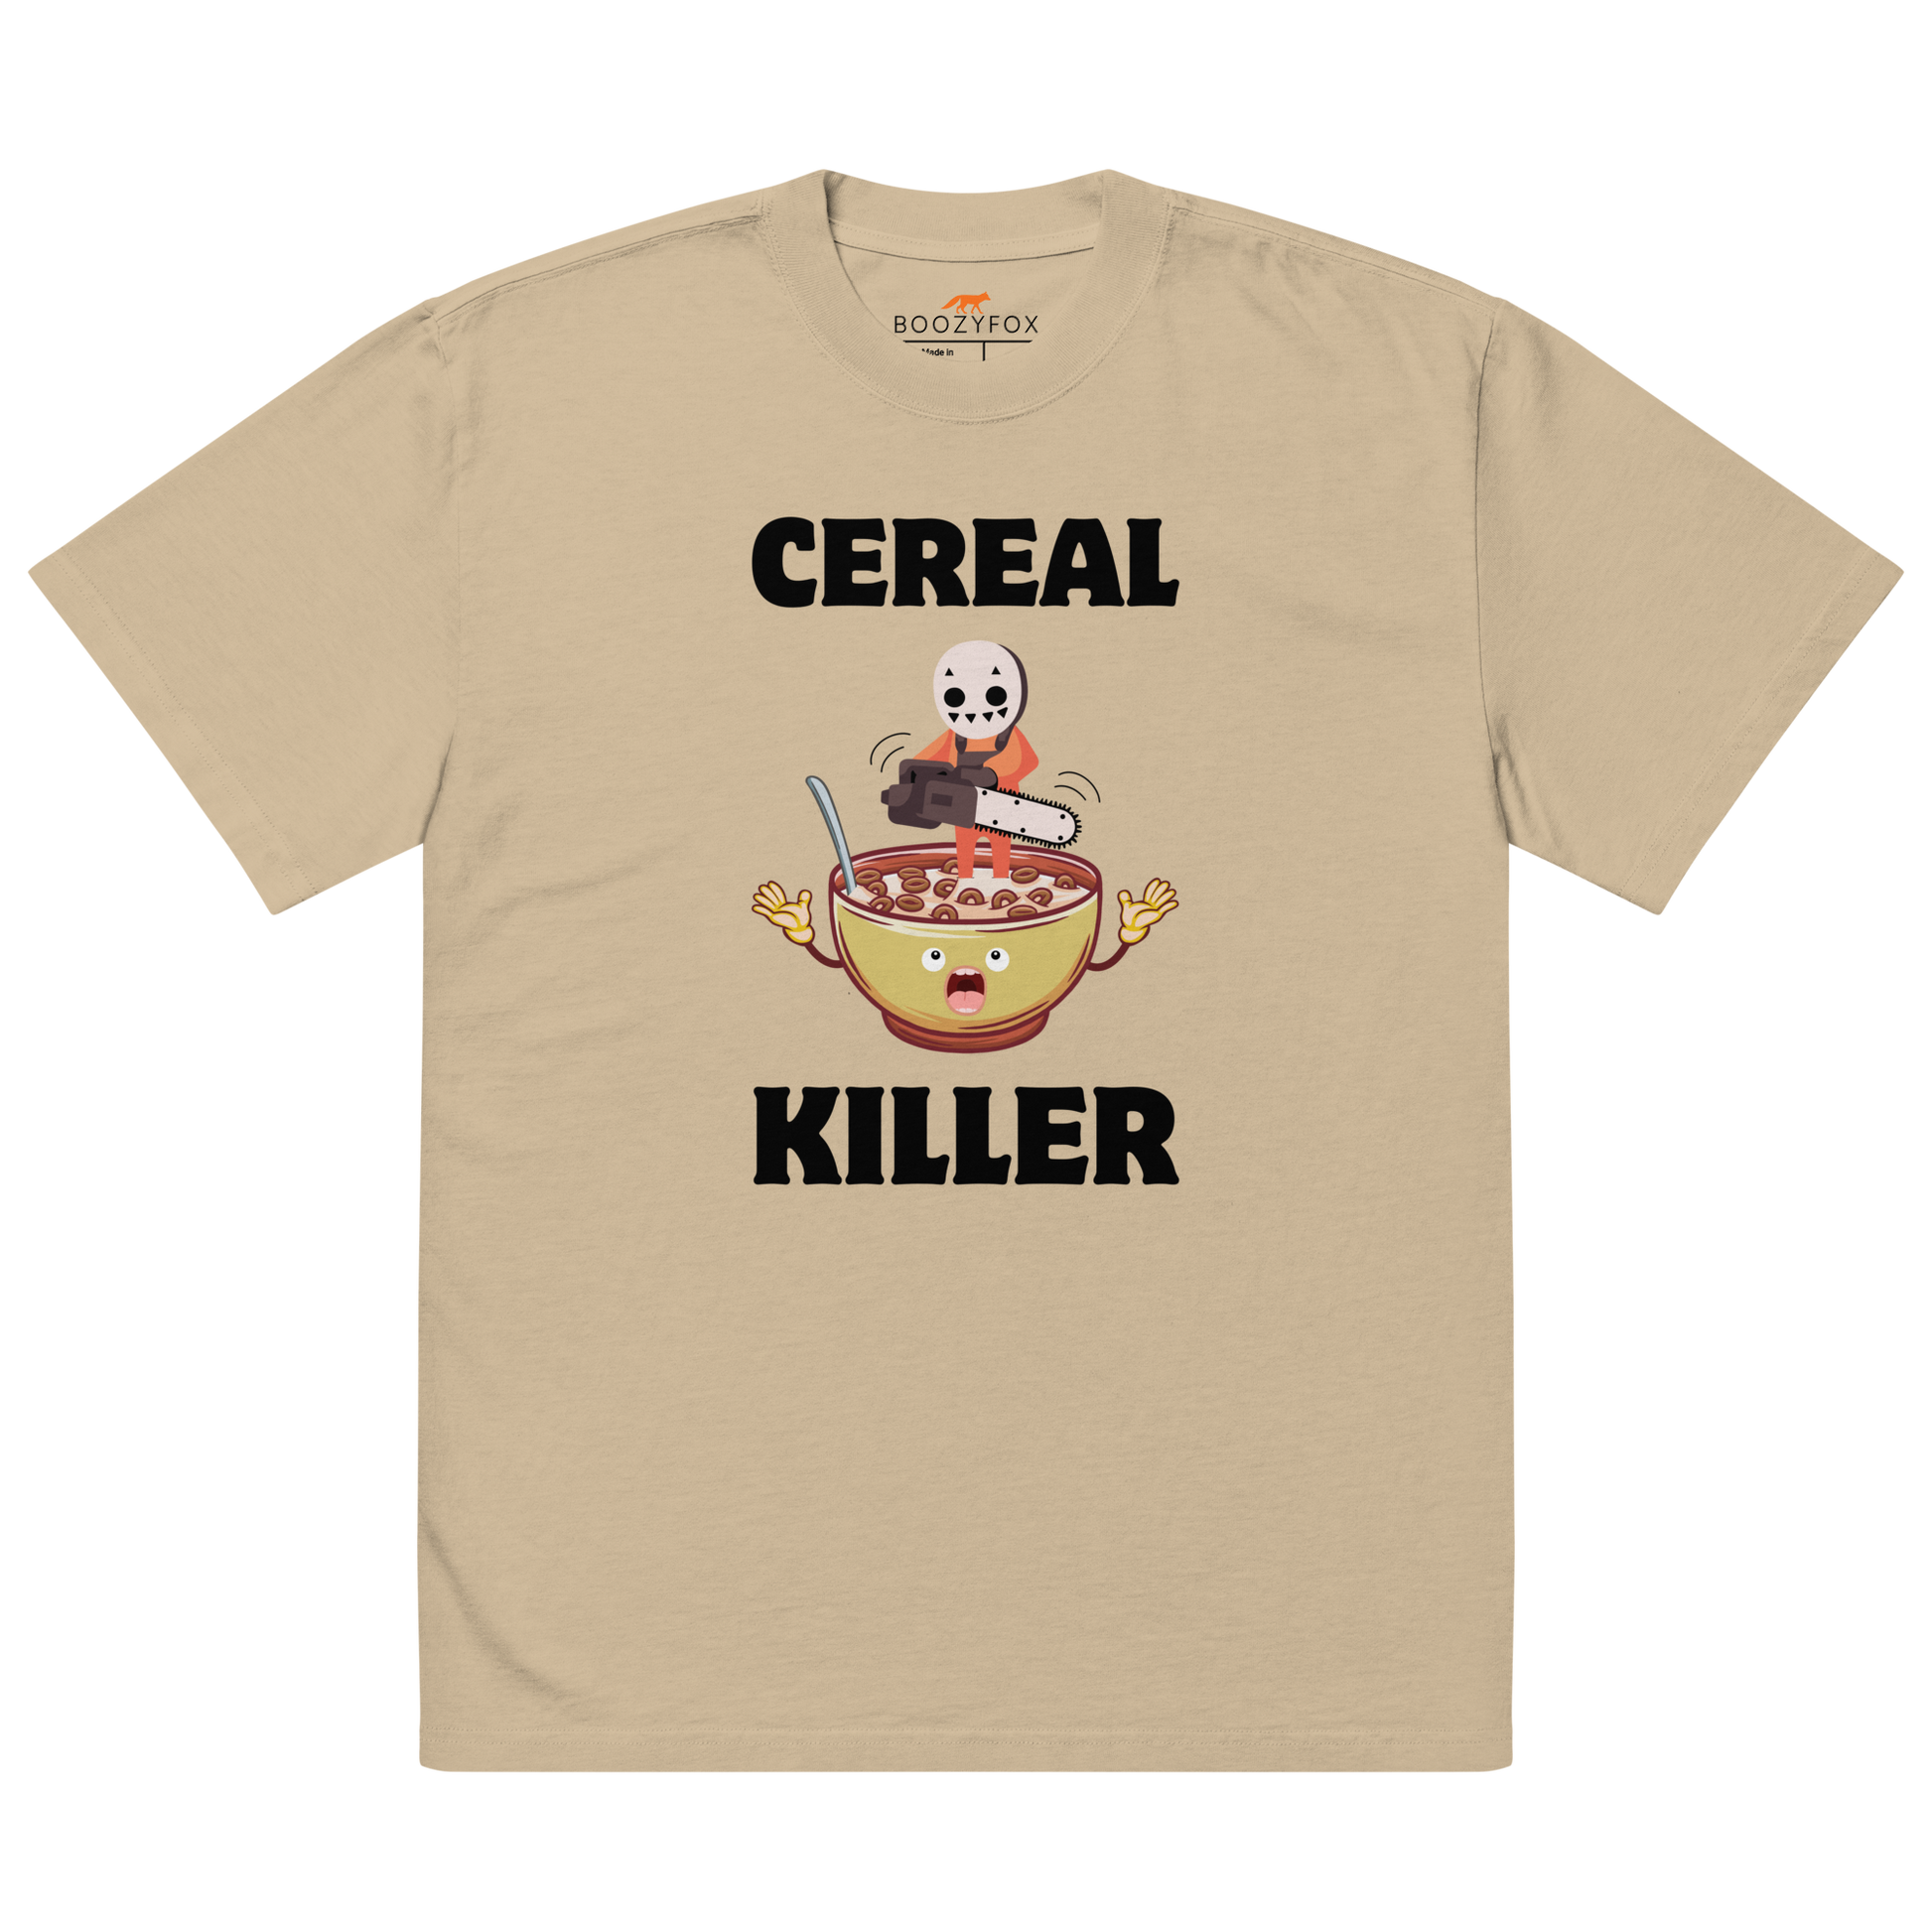 Faded Khaki Cereal Killer Oversized T-Shirt featuring a Cereal Killer graphic on the chest - Funny Graphic Oversized Tees - Boozy Fox